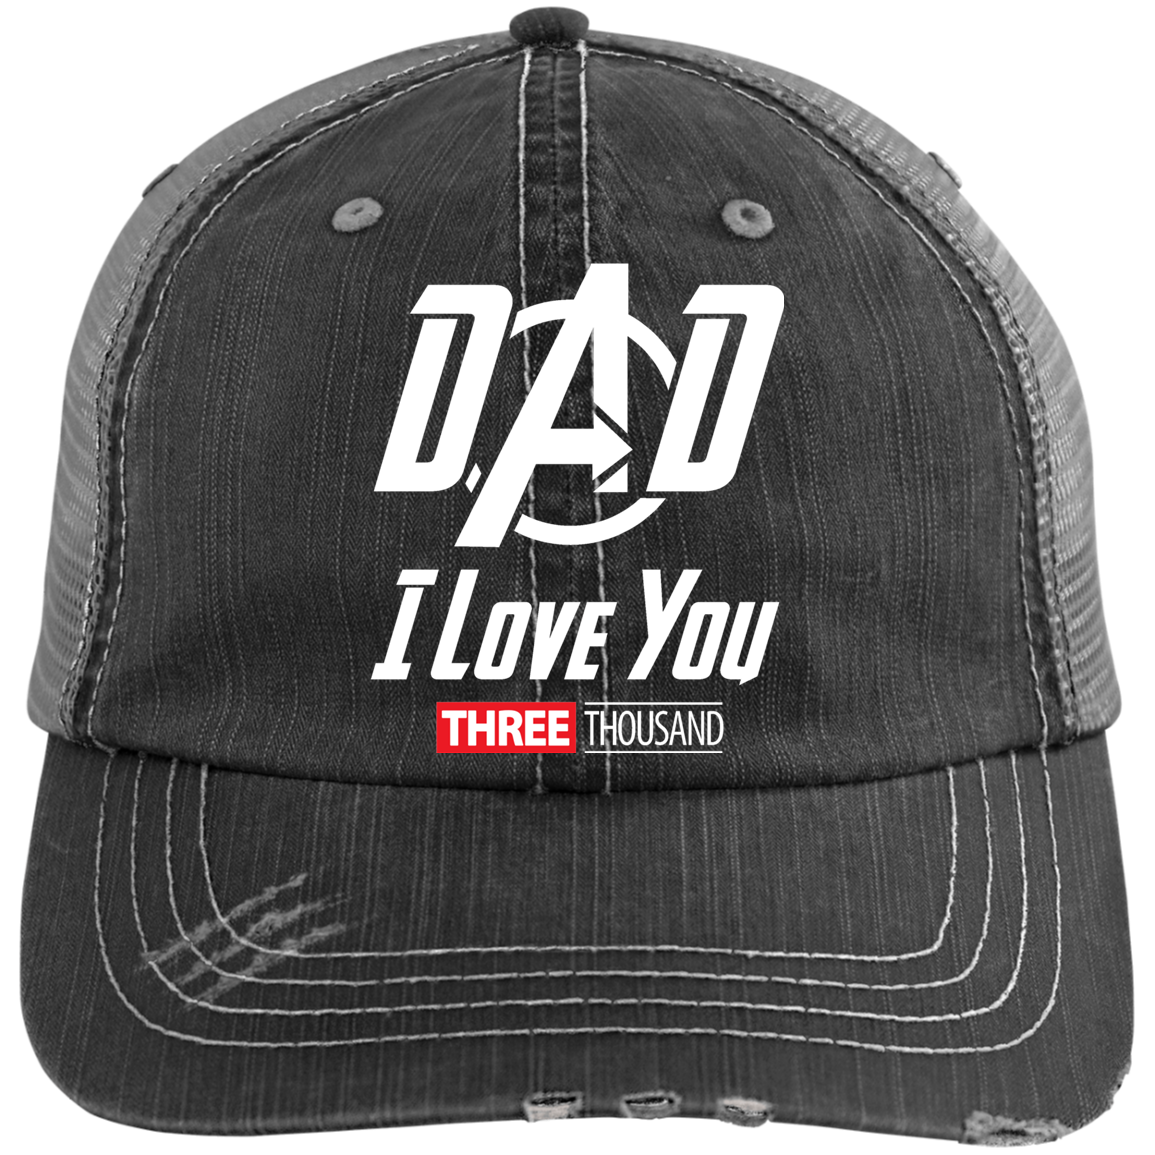 Dad I Love You Three Thousand - Embroidered Distressed Trucker Cap